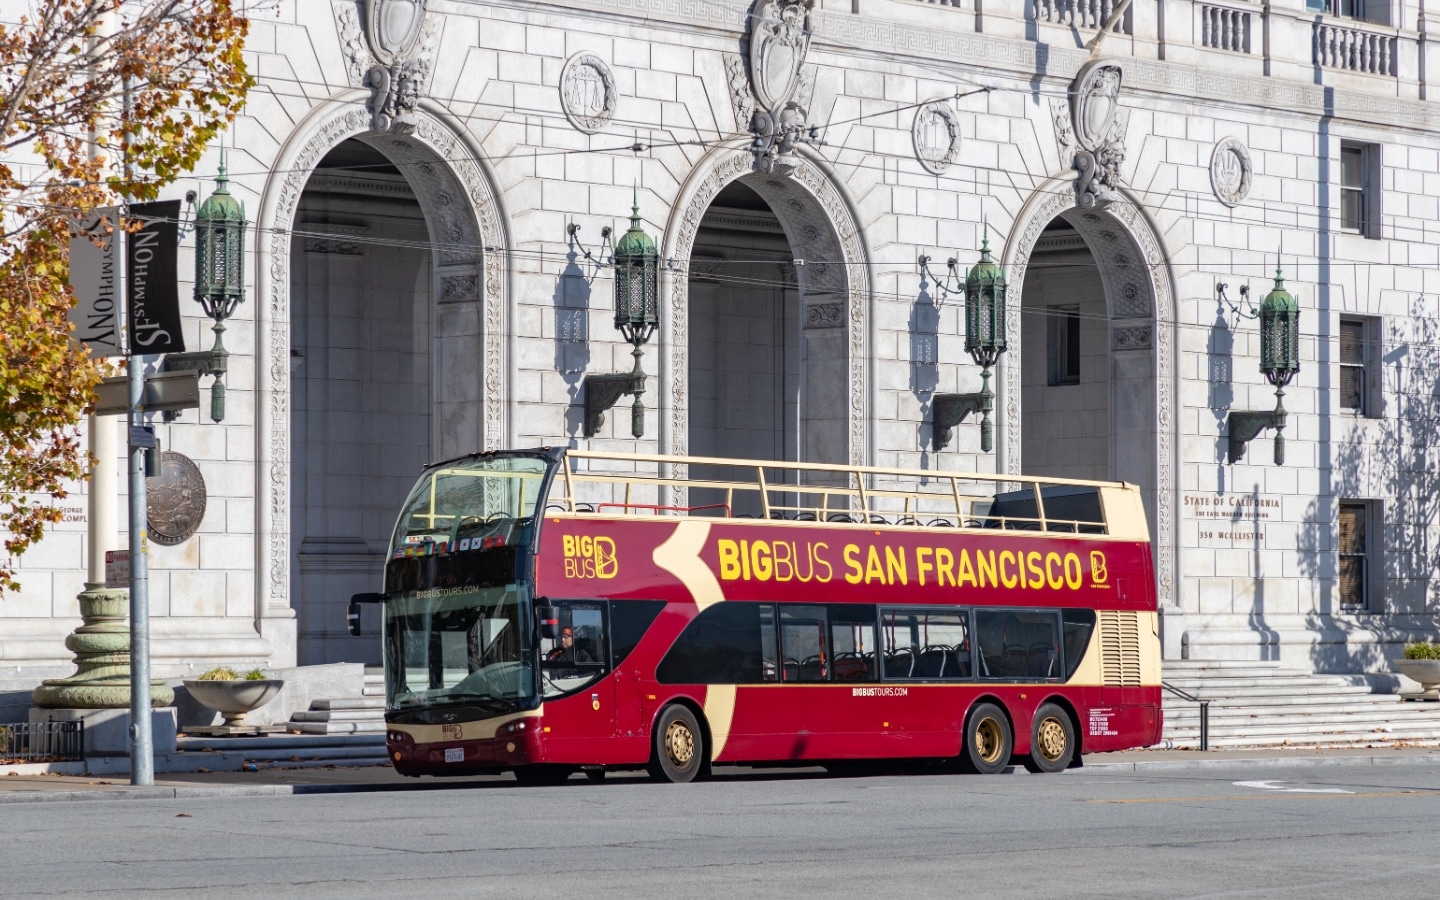 Explore SF On A Guided Tour